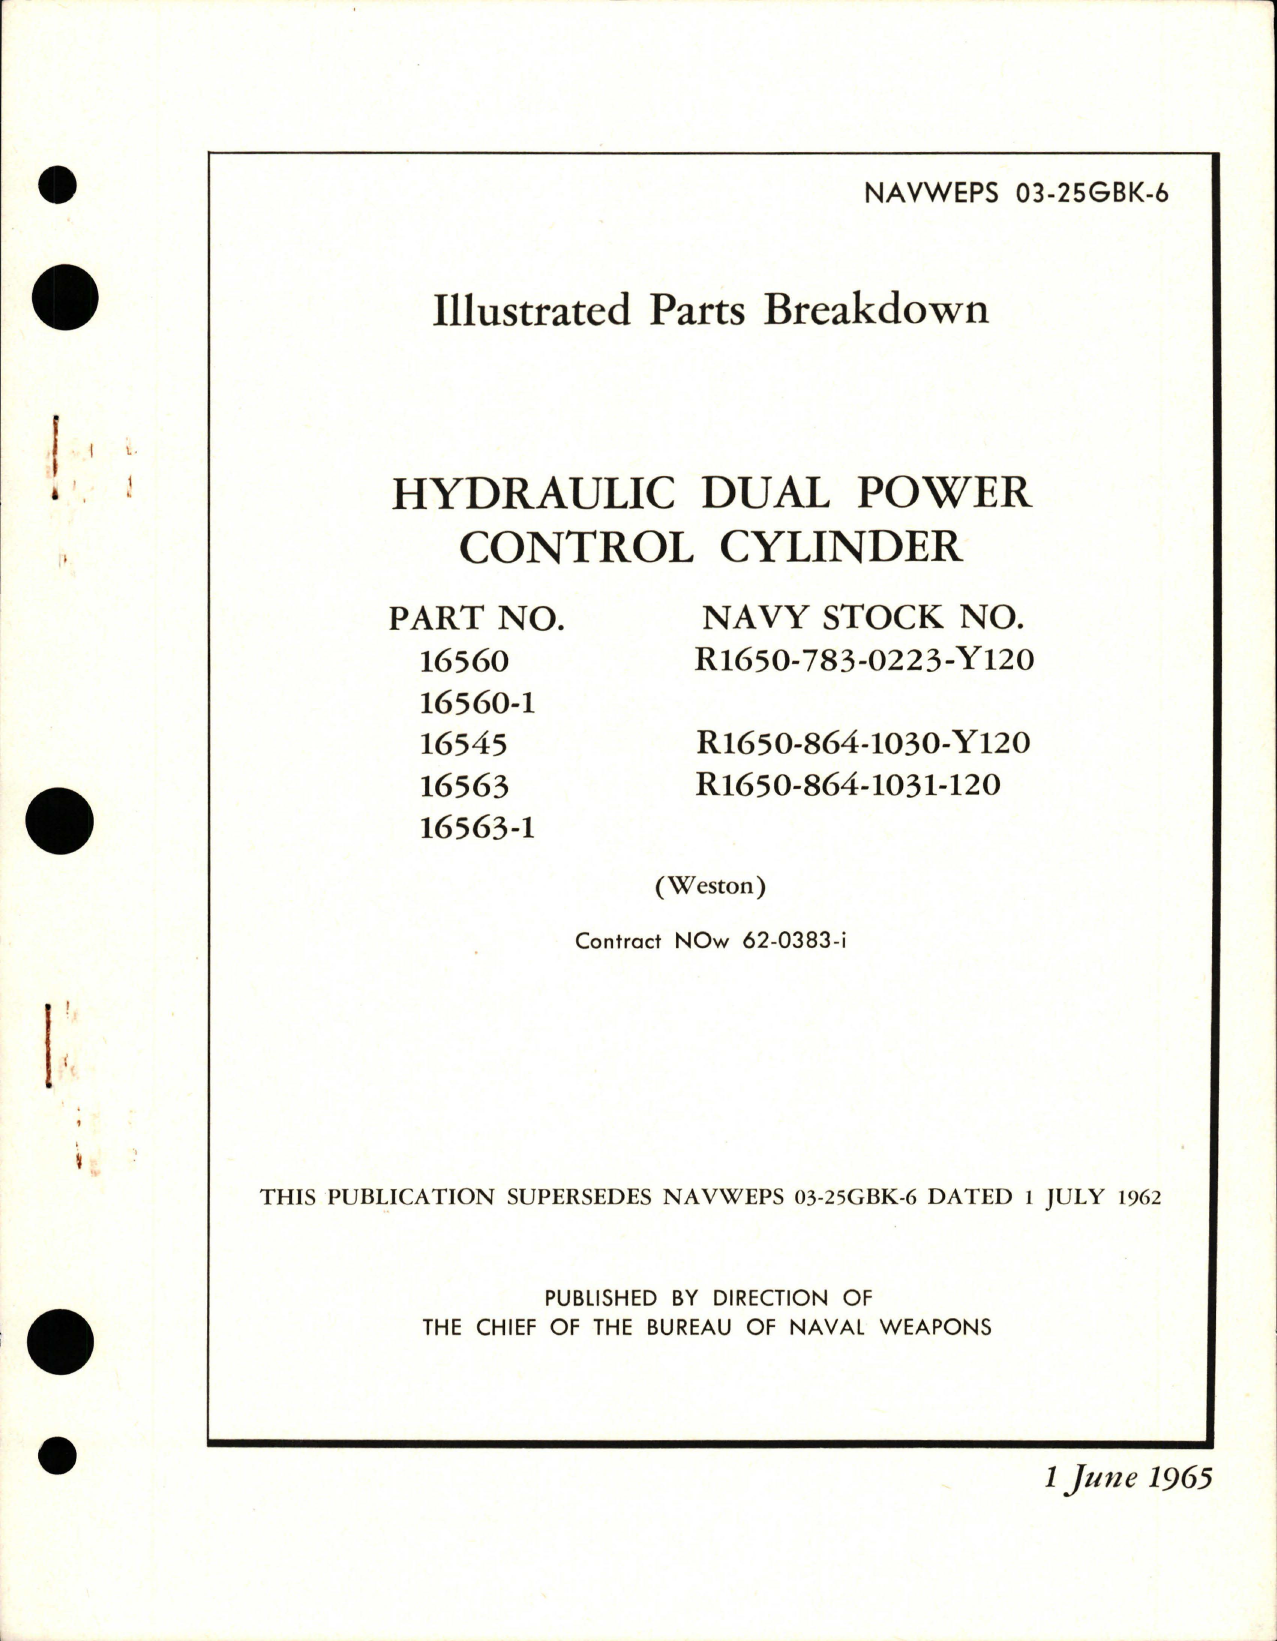 Sample page 1 from AirCorps Library document: Illustrated Parts Breakdown for Hydraulic Dual Power Control Cylinder - Parts 16560, 16560-1, 16545, 16563, and 16563-1 